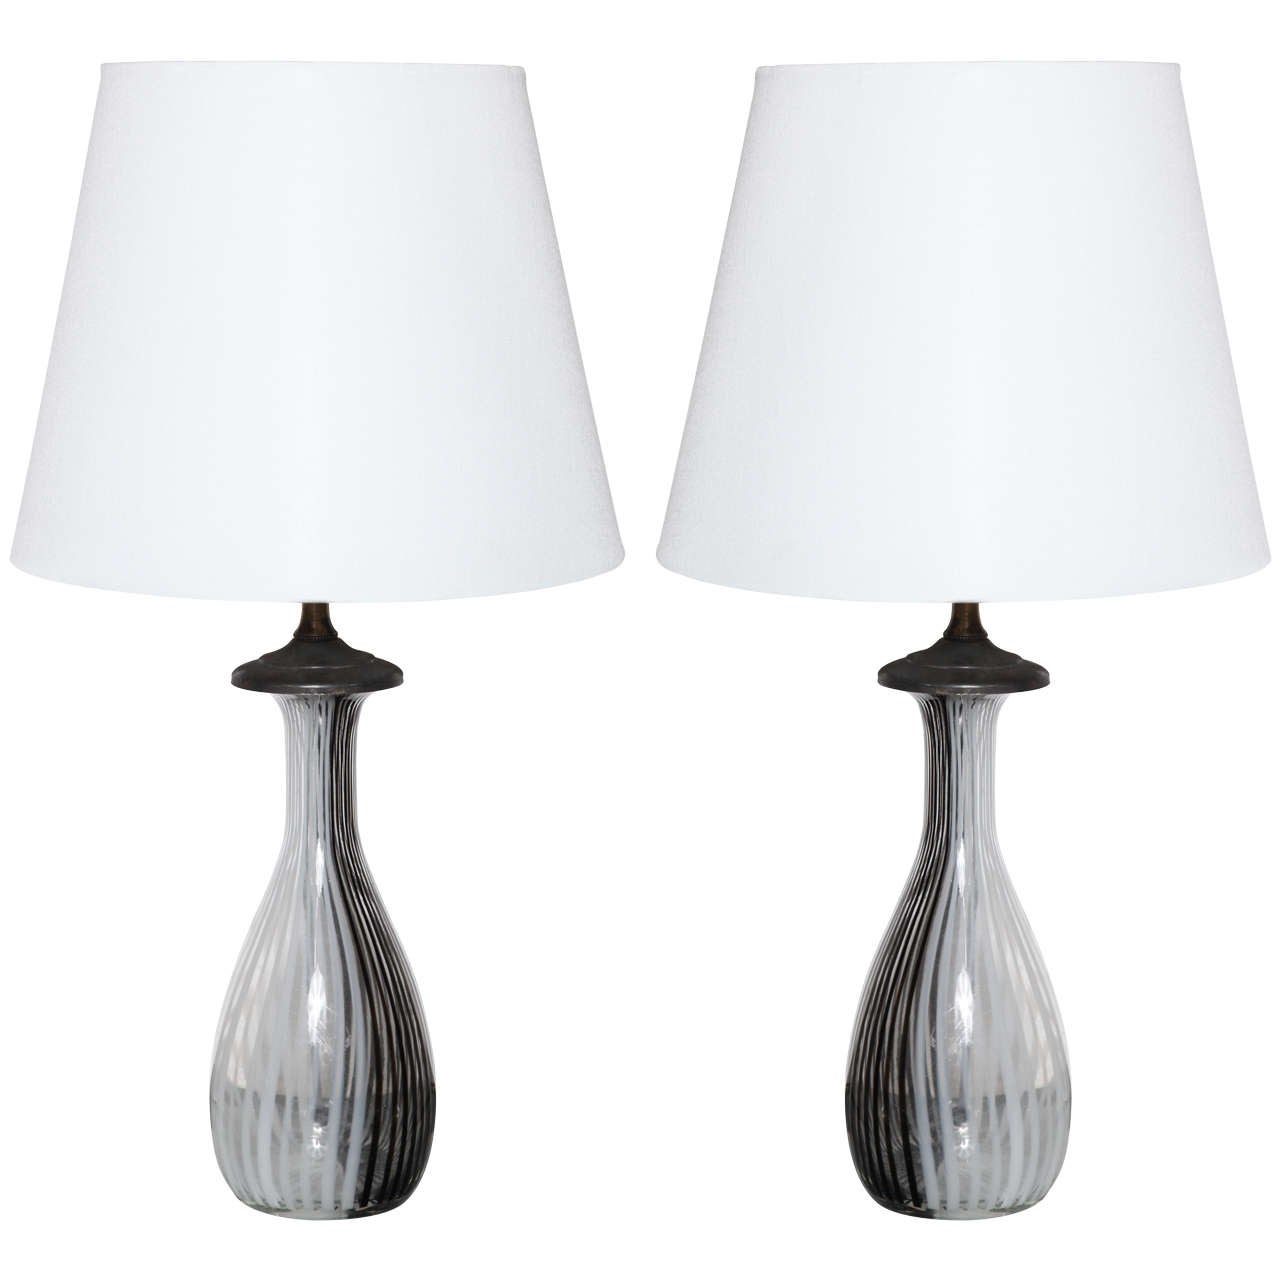 Pair of Black and White Stripe Murano Glass Table Lamps For Sale